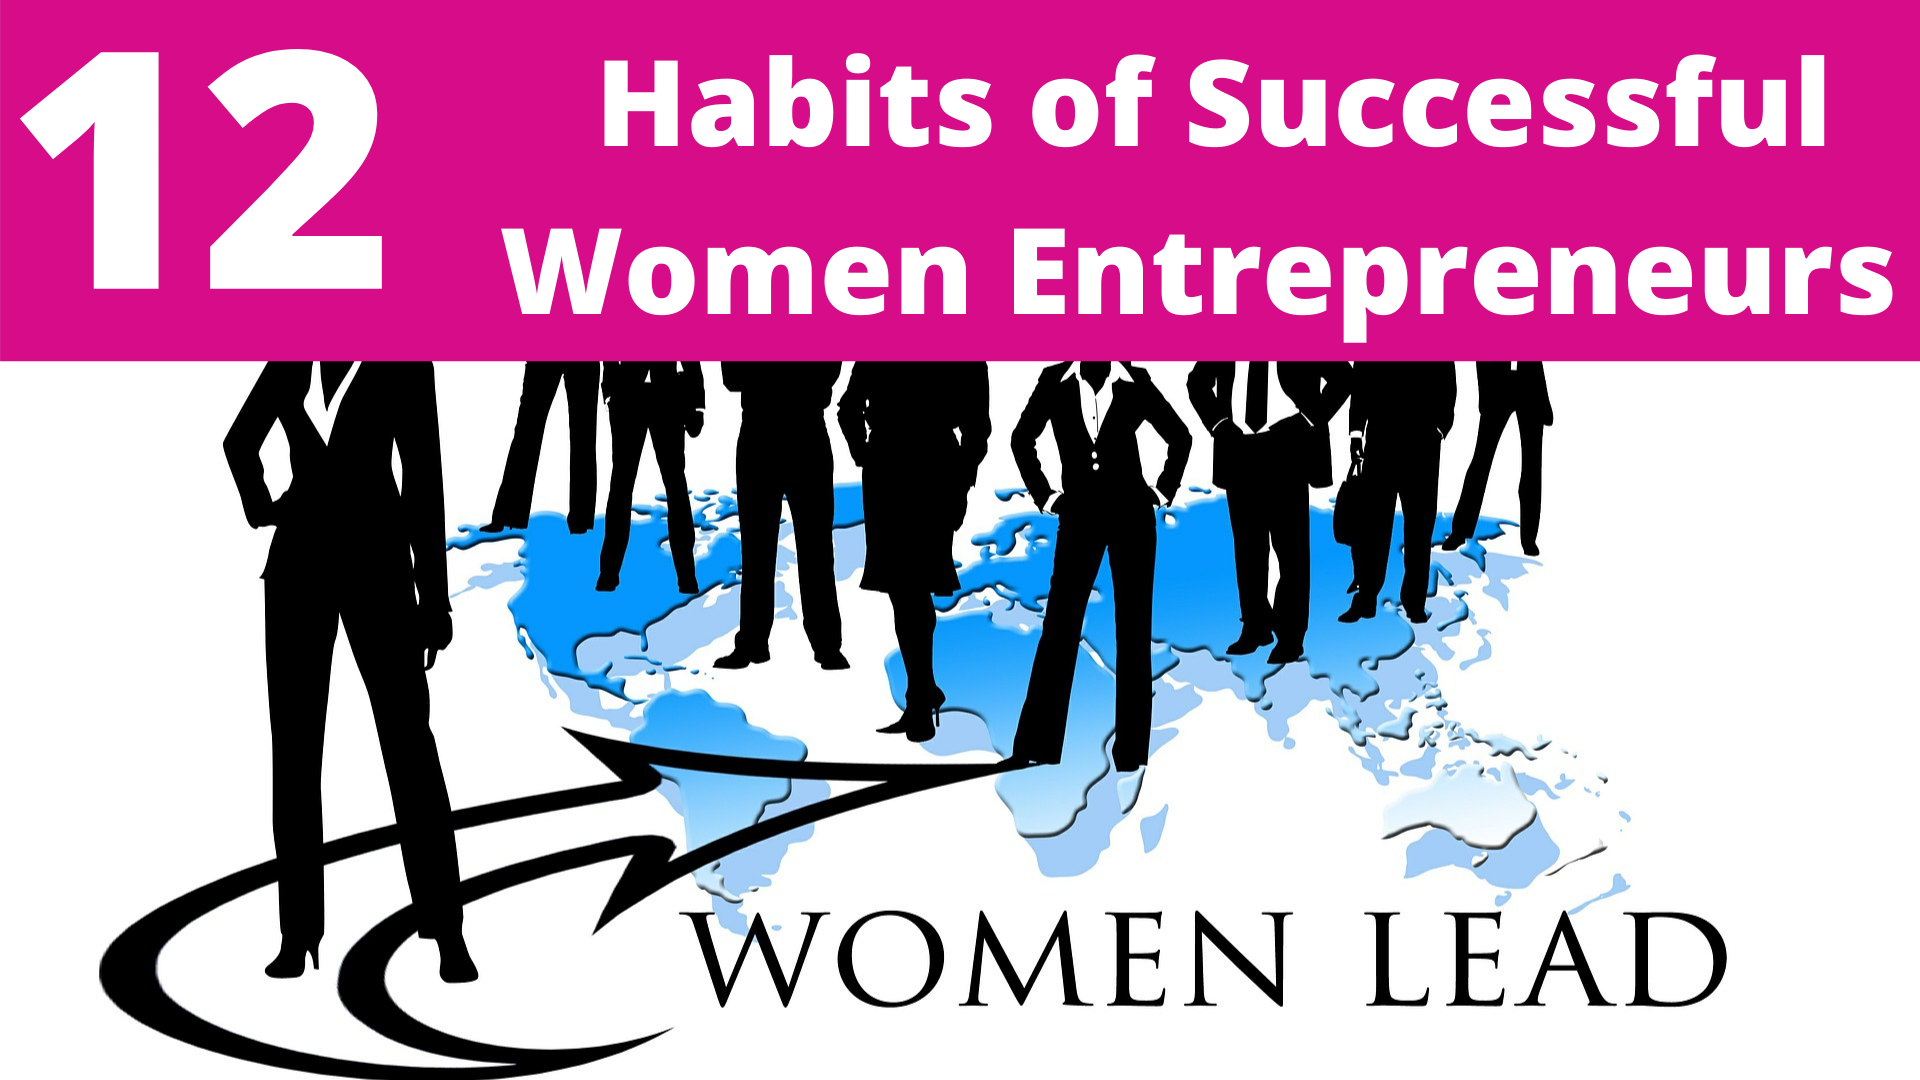 12 Top Habits of Highly Successful Women Entrepreneurs